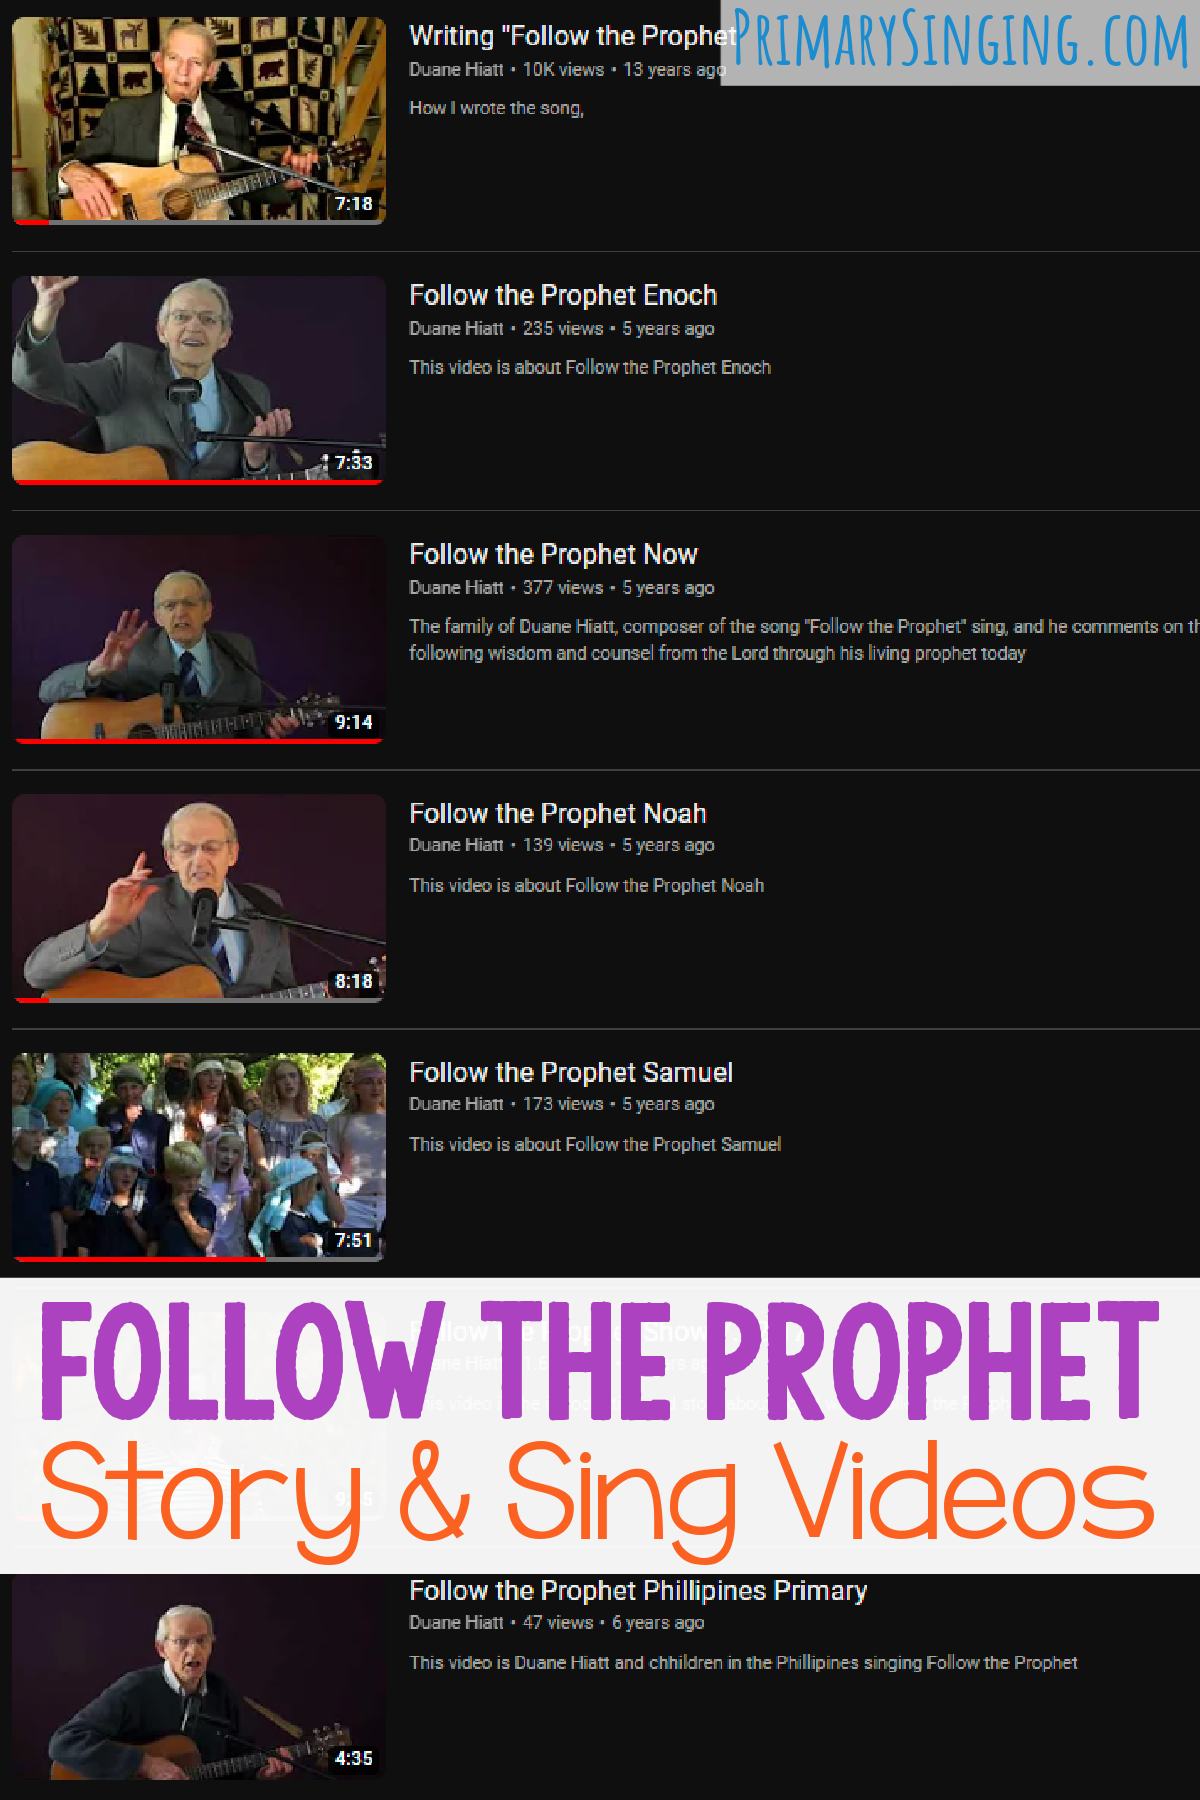 Follow the Prophet Story & Sing Videos - Learn the story behind the making of the LDS Primary children's songbook song Follow the Prophet from composer Duane E. Hiatt and the testimonies of his family members with these sweet videos that share some lessons learned from each of the Old Testament prophets and a sing-along video of the song verse.